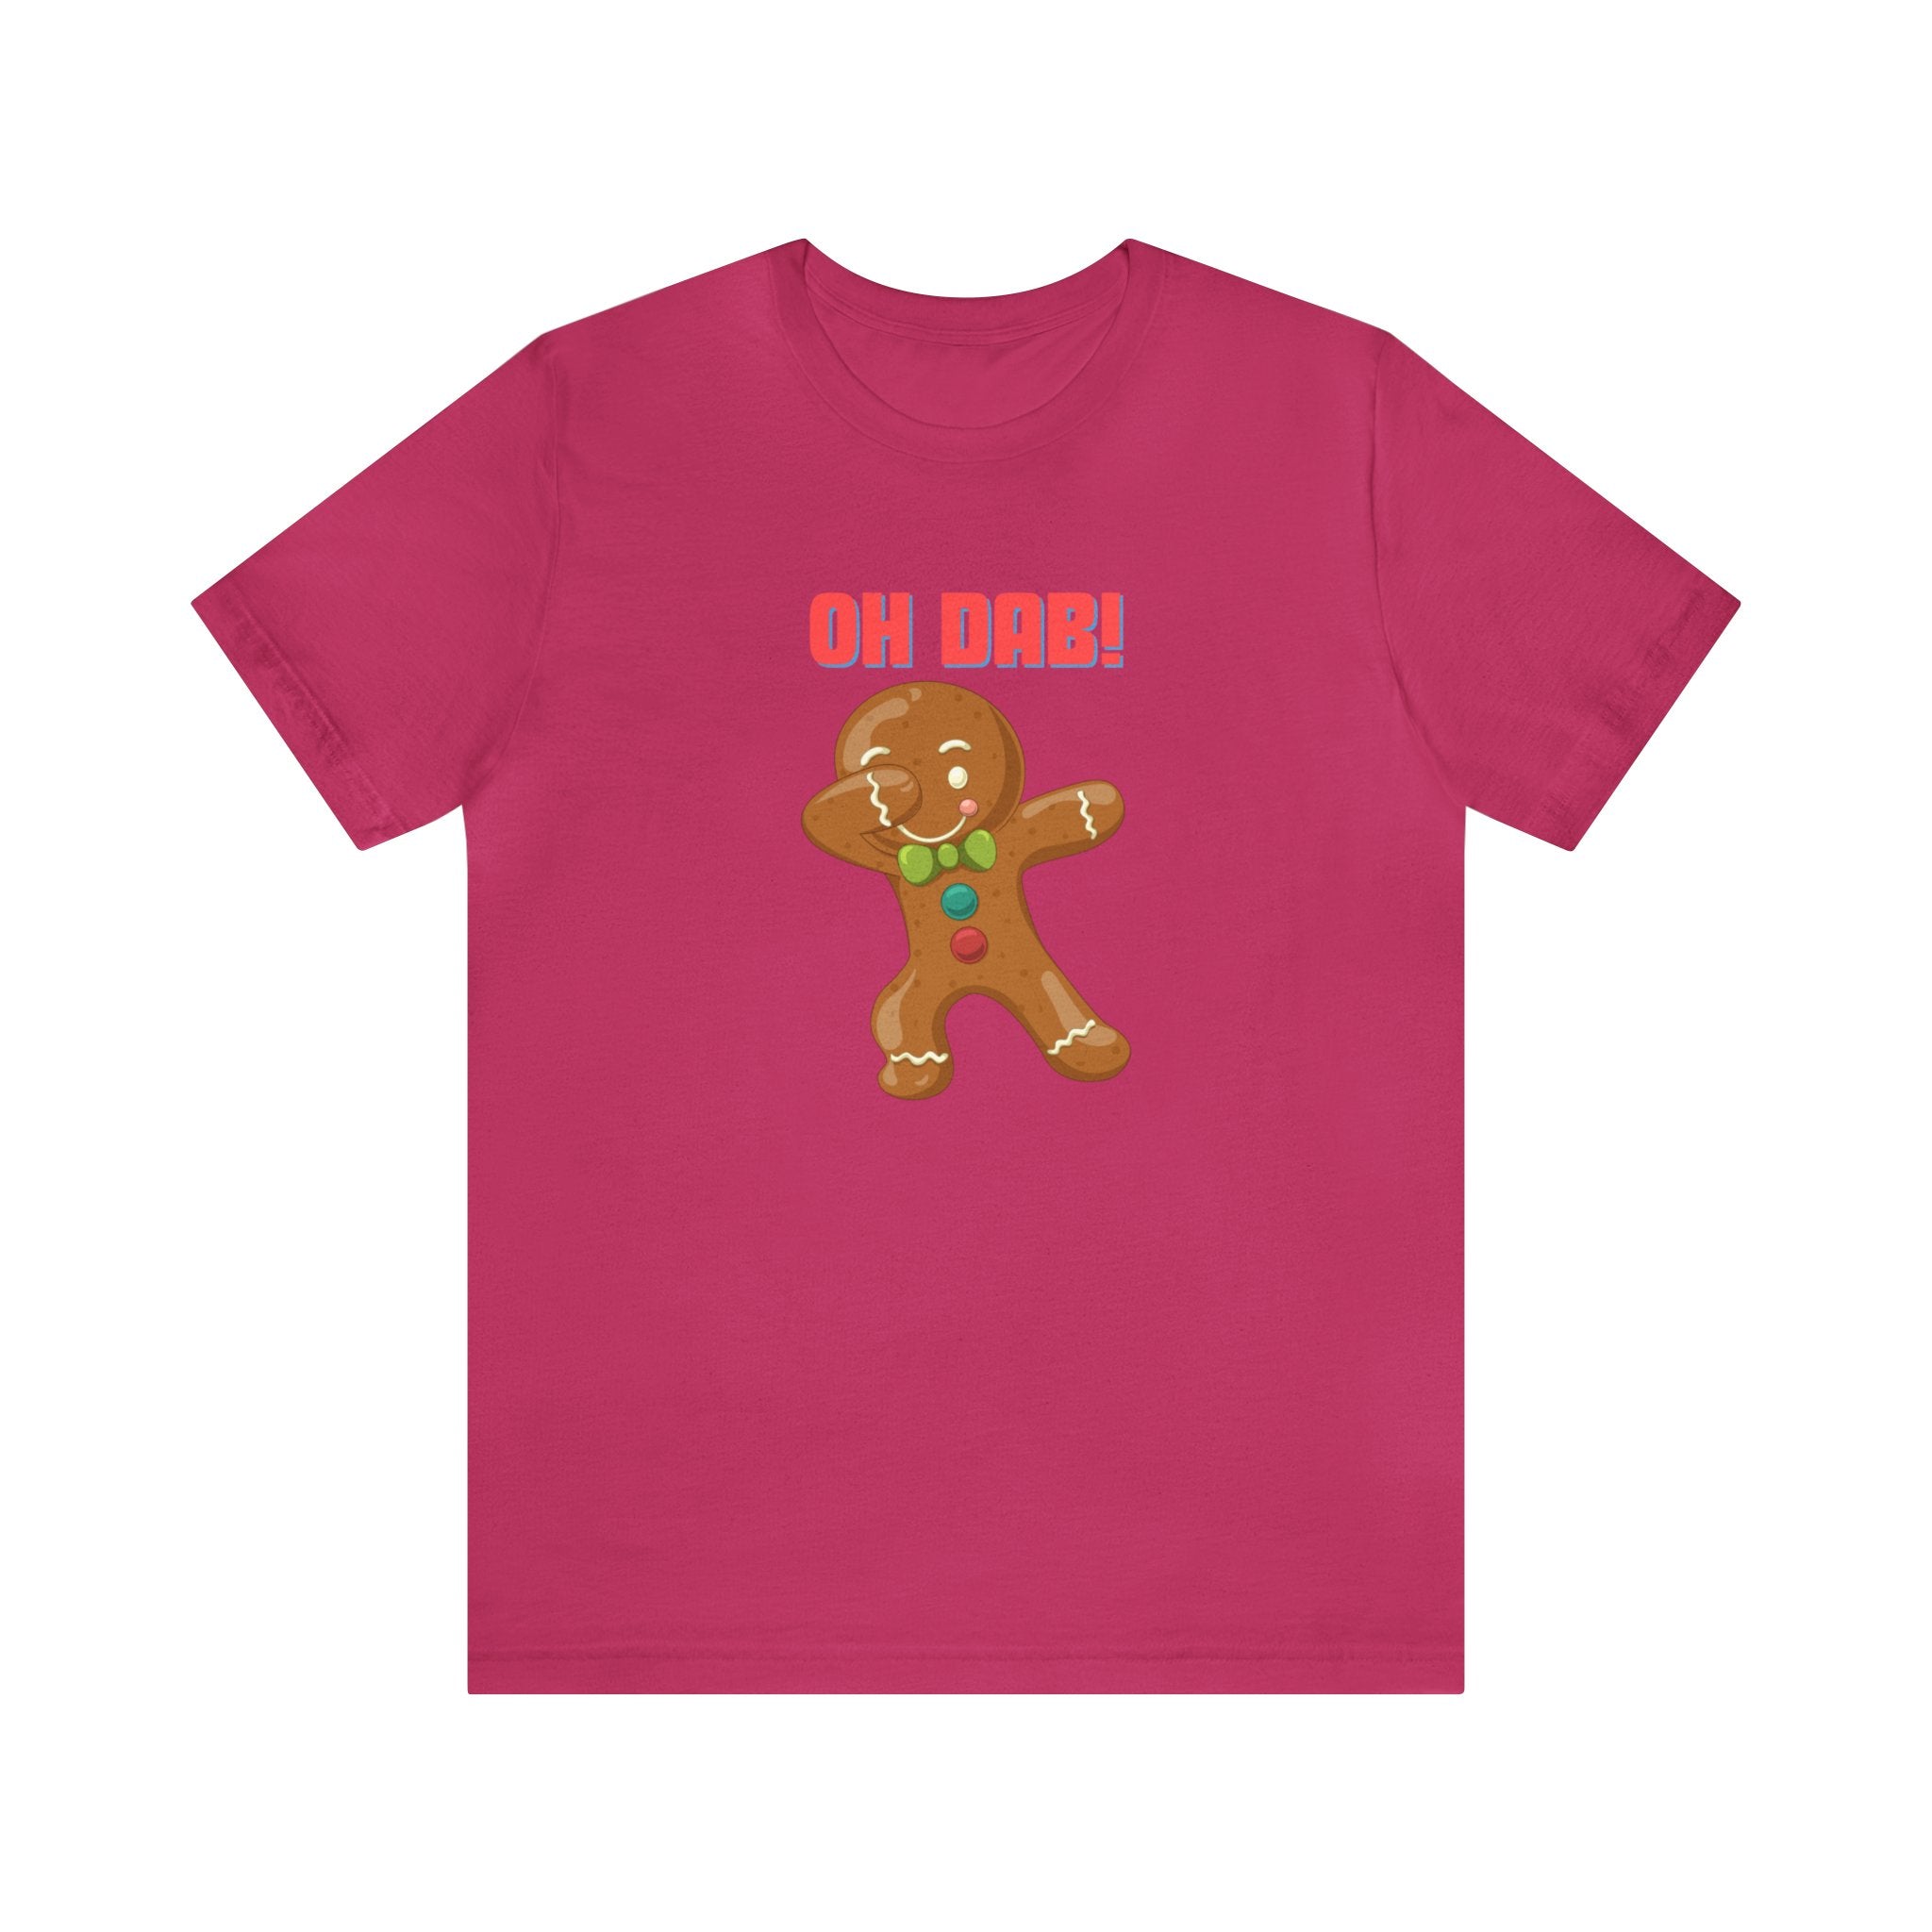 Oh Dab! Gingerbreadman : Unisex 100% Comfy Cotton, T-Shirt by Bella+Canvas